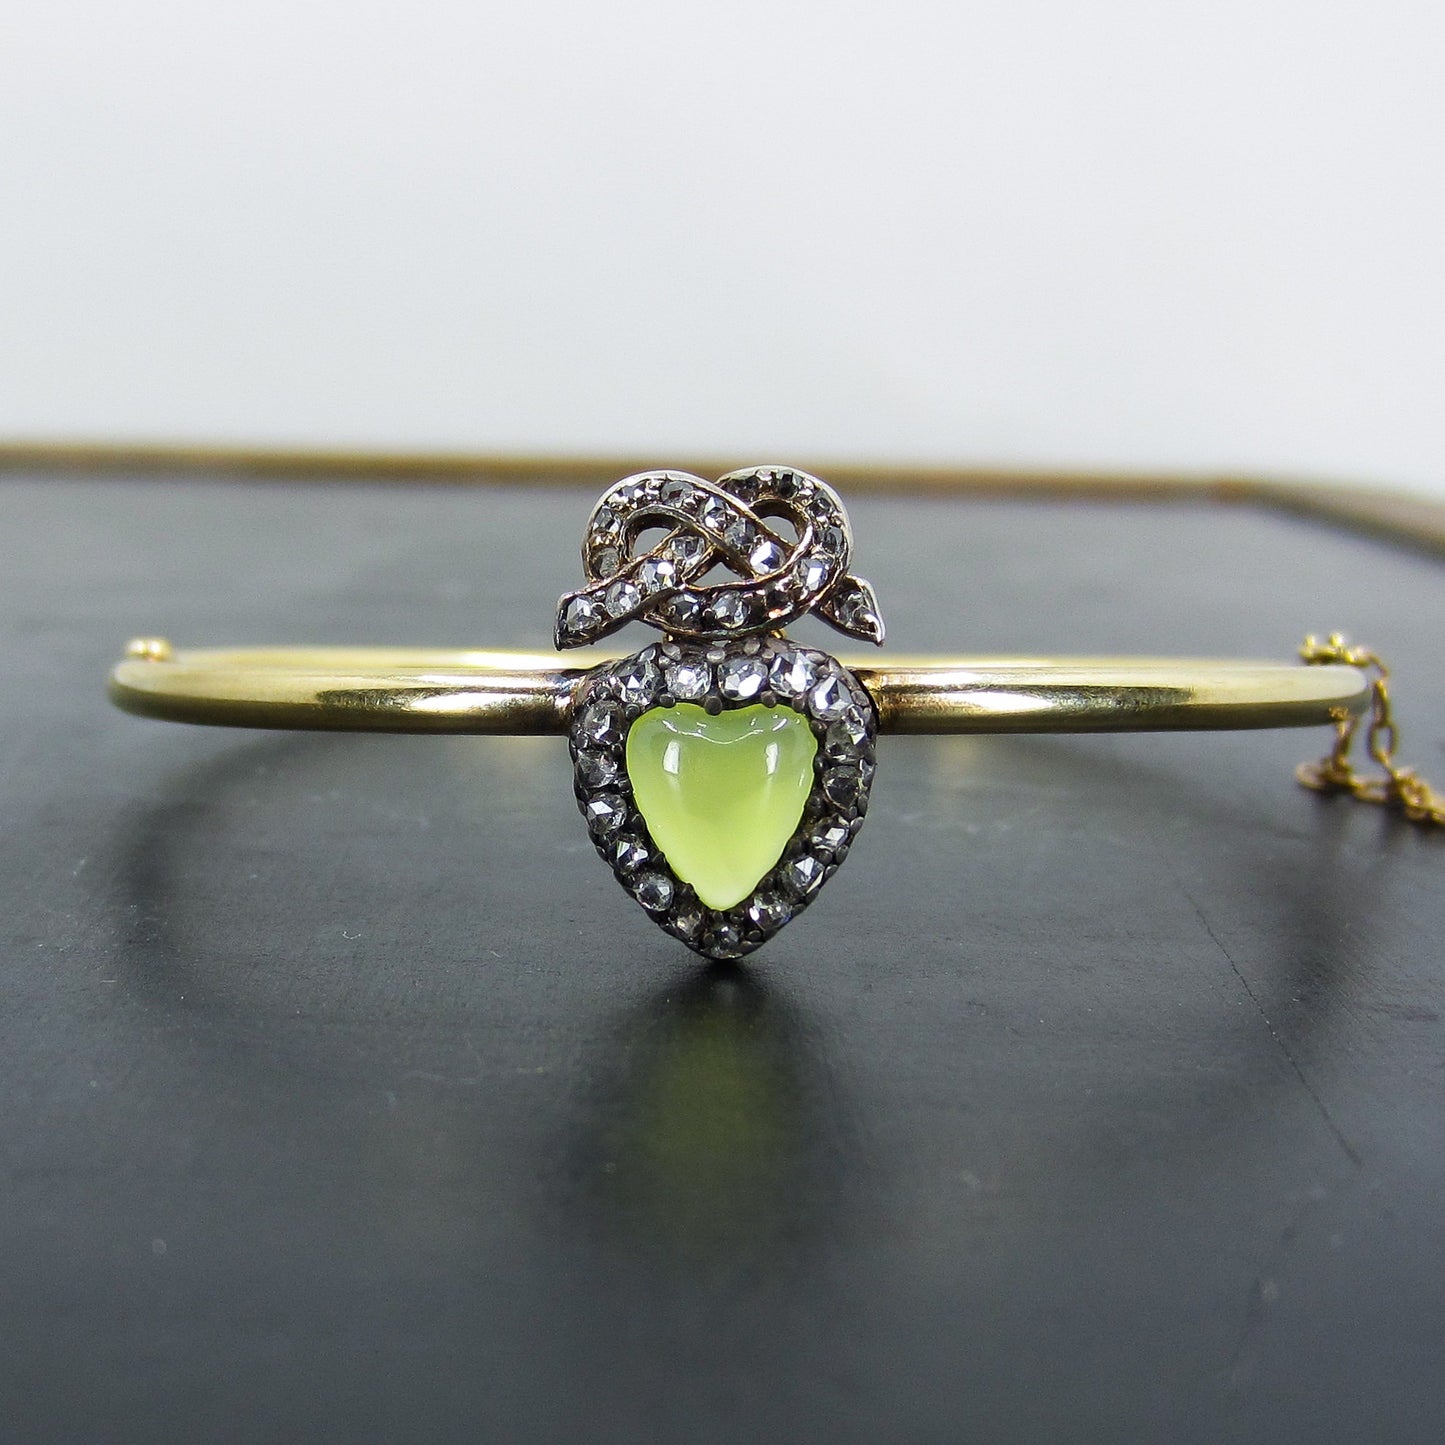 SOLD--Victorian Chrysoprase and Rose Cut Diamond Heart with Love Knot Bracelet Silver/14k c. 1890